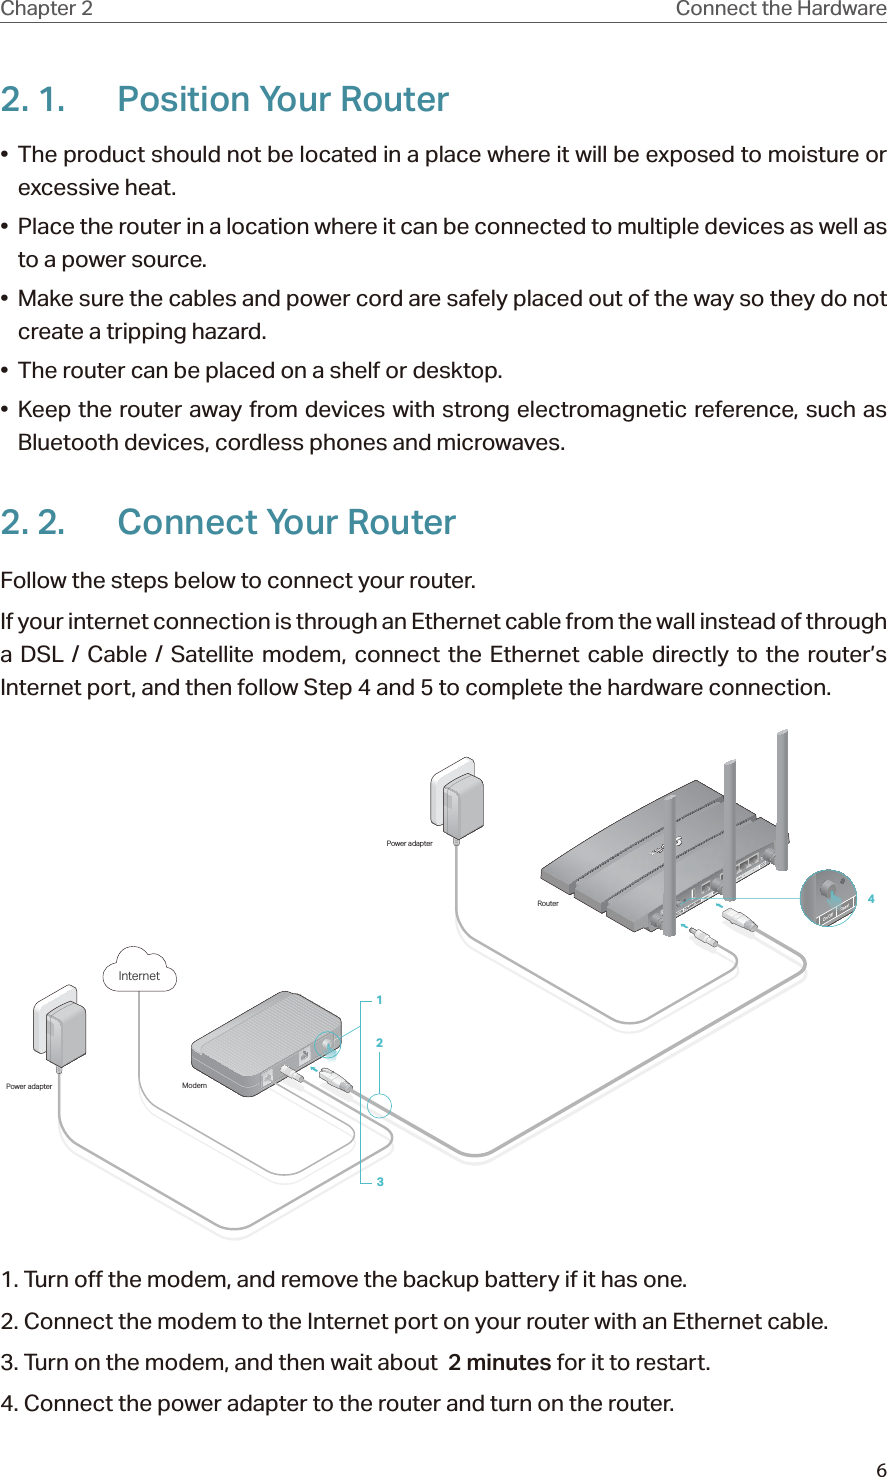 6Chapter 2 Connect the Hardware2. 1.  Position Your Router•  The product should not be located in a place where it will be exposed to moisture or excessive heat.•  Place the router in a location where it can be connected to multiple devices as well as to a power source.•  Make sure the cables and power cord are safely placed out of the way so they do not create a tripping hazard.•  The router can be placed on a shelf or desktop.• Keep the router away from devices with strong electromagnetic reference, such as Bluetooth devices, cordless phones and microwaves.2. 2.  Connect Your RouterFollow the steps below to connect your router.If your internet connection is through an Ethernet cable from the wall instead of through a DSL / Cable / Satellite modem, connect the Ethernet cable directly to the router’s Internet port, and then follow Step 4 and 5 to complete the hardware connection.ModemPower adapterPower adapterRouter123Internet41. Turn off the modem, and remove the backup battery if it has one.2. Connect the modem to the Internet port on your router with an Ethernet cable.3. Turn on the modem, and then wait about  2 minutes for it to restart.4. Connect the power adapter to the router and turn on the router.